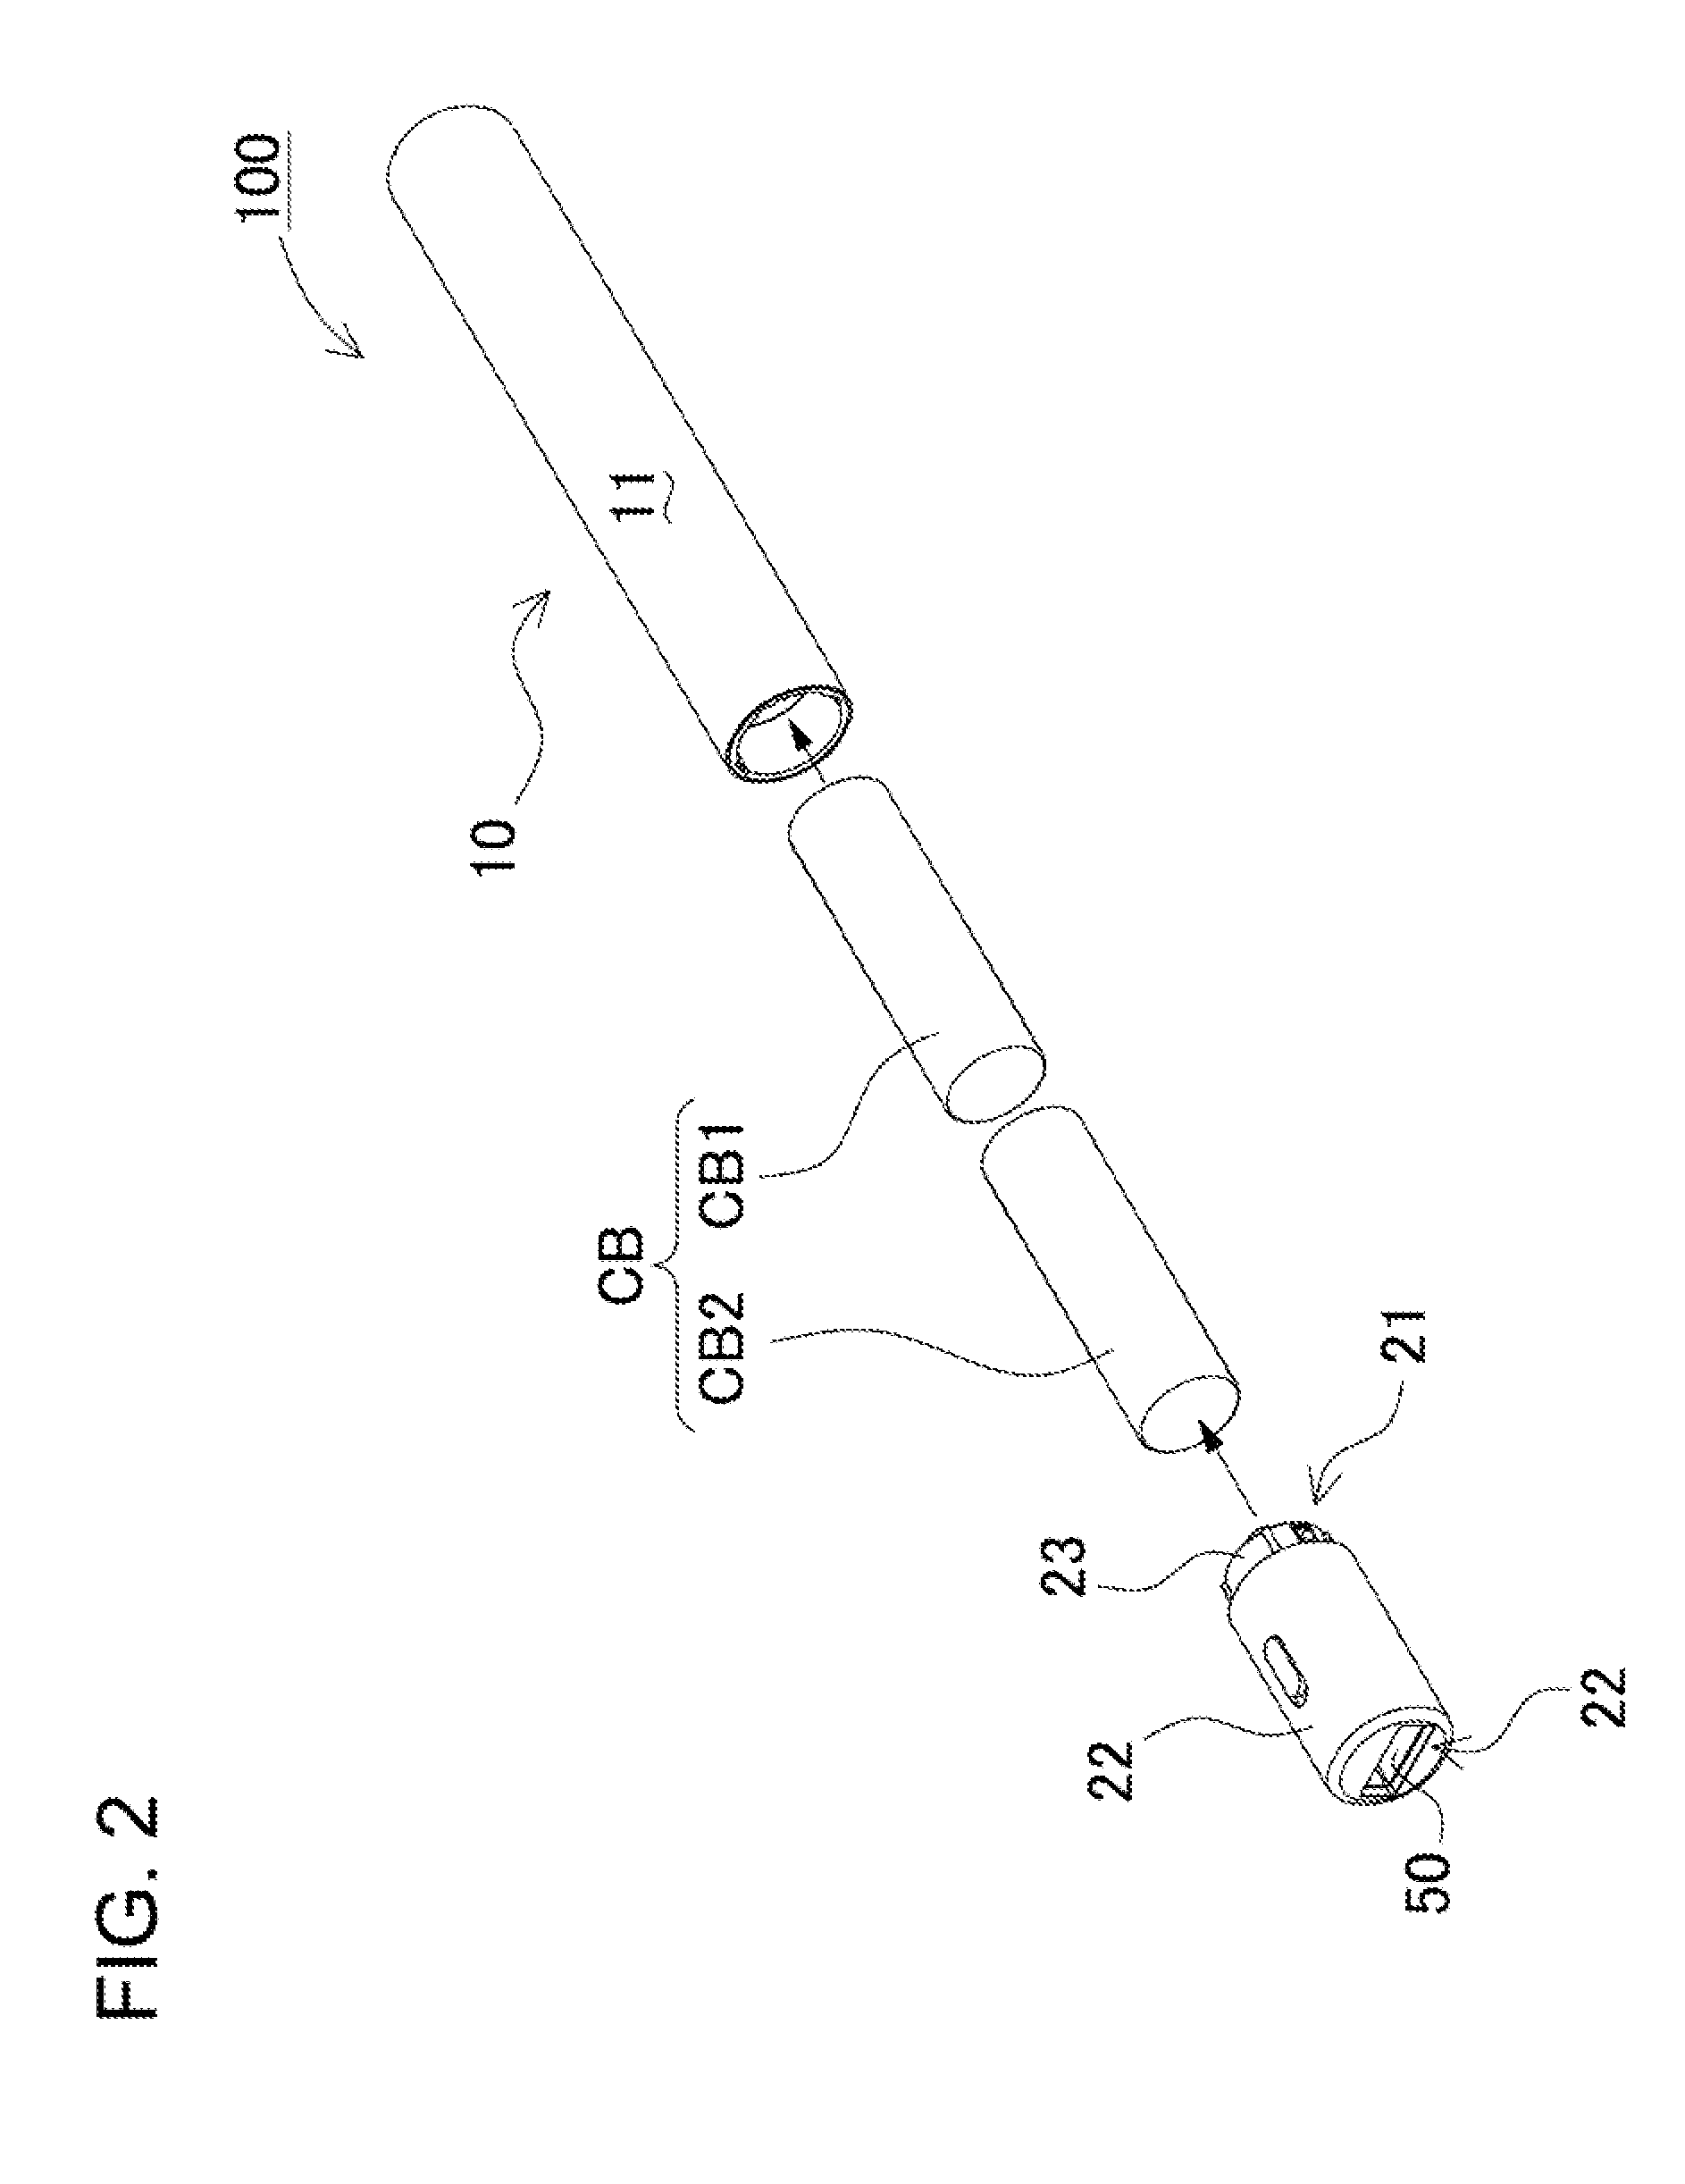 Portable power source apparatus capable of holding circular cylindrical batteries